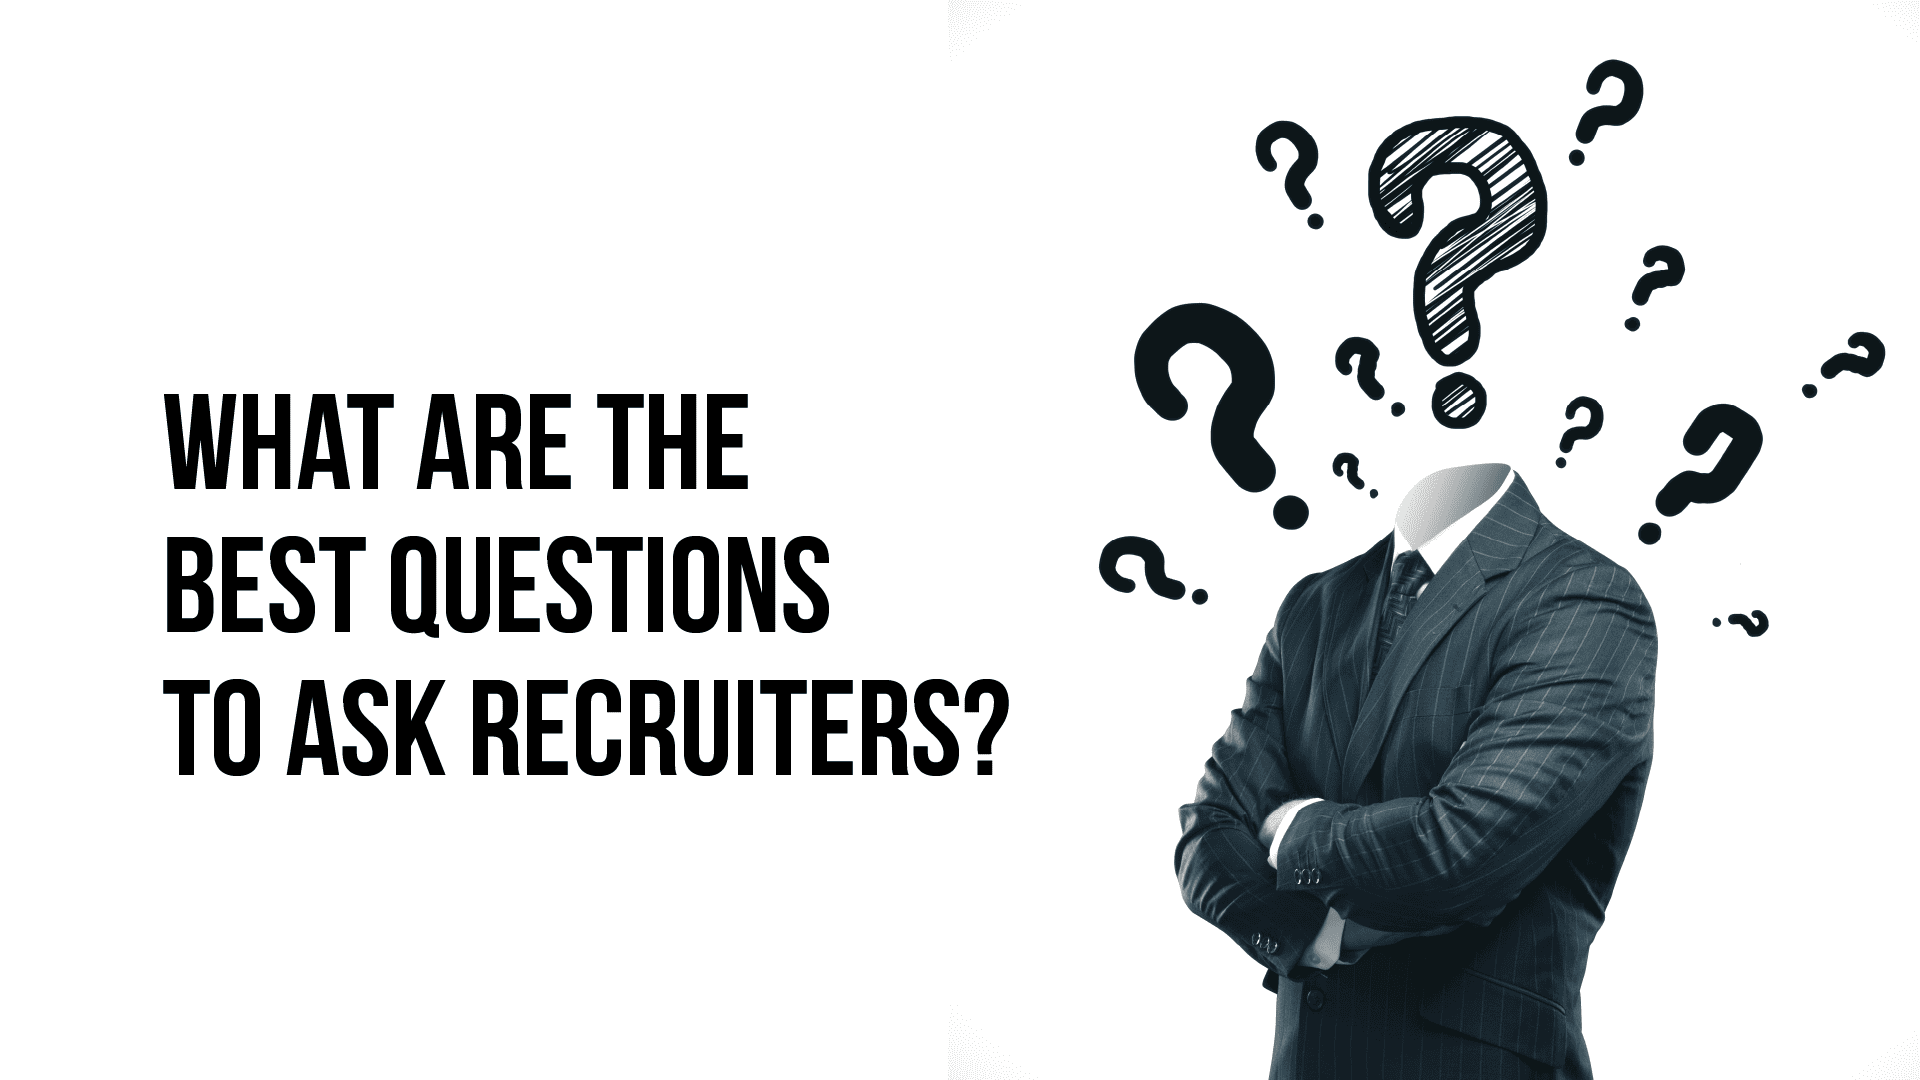 What Are the Best Questions to Ask Recruiters?